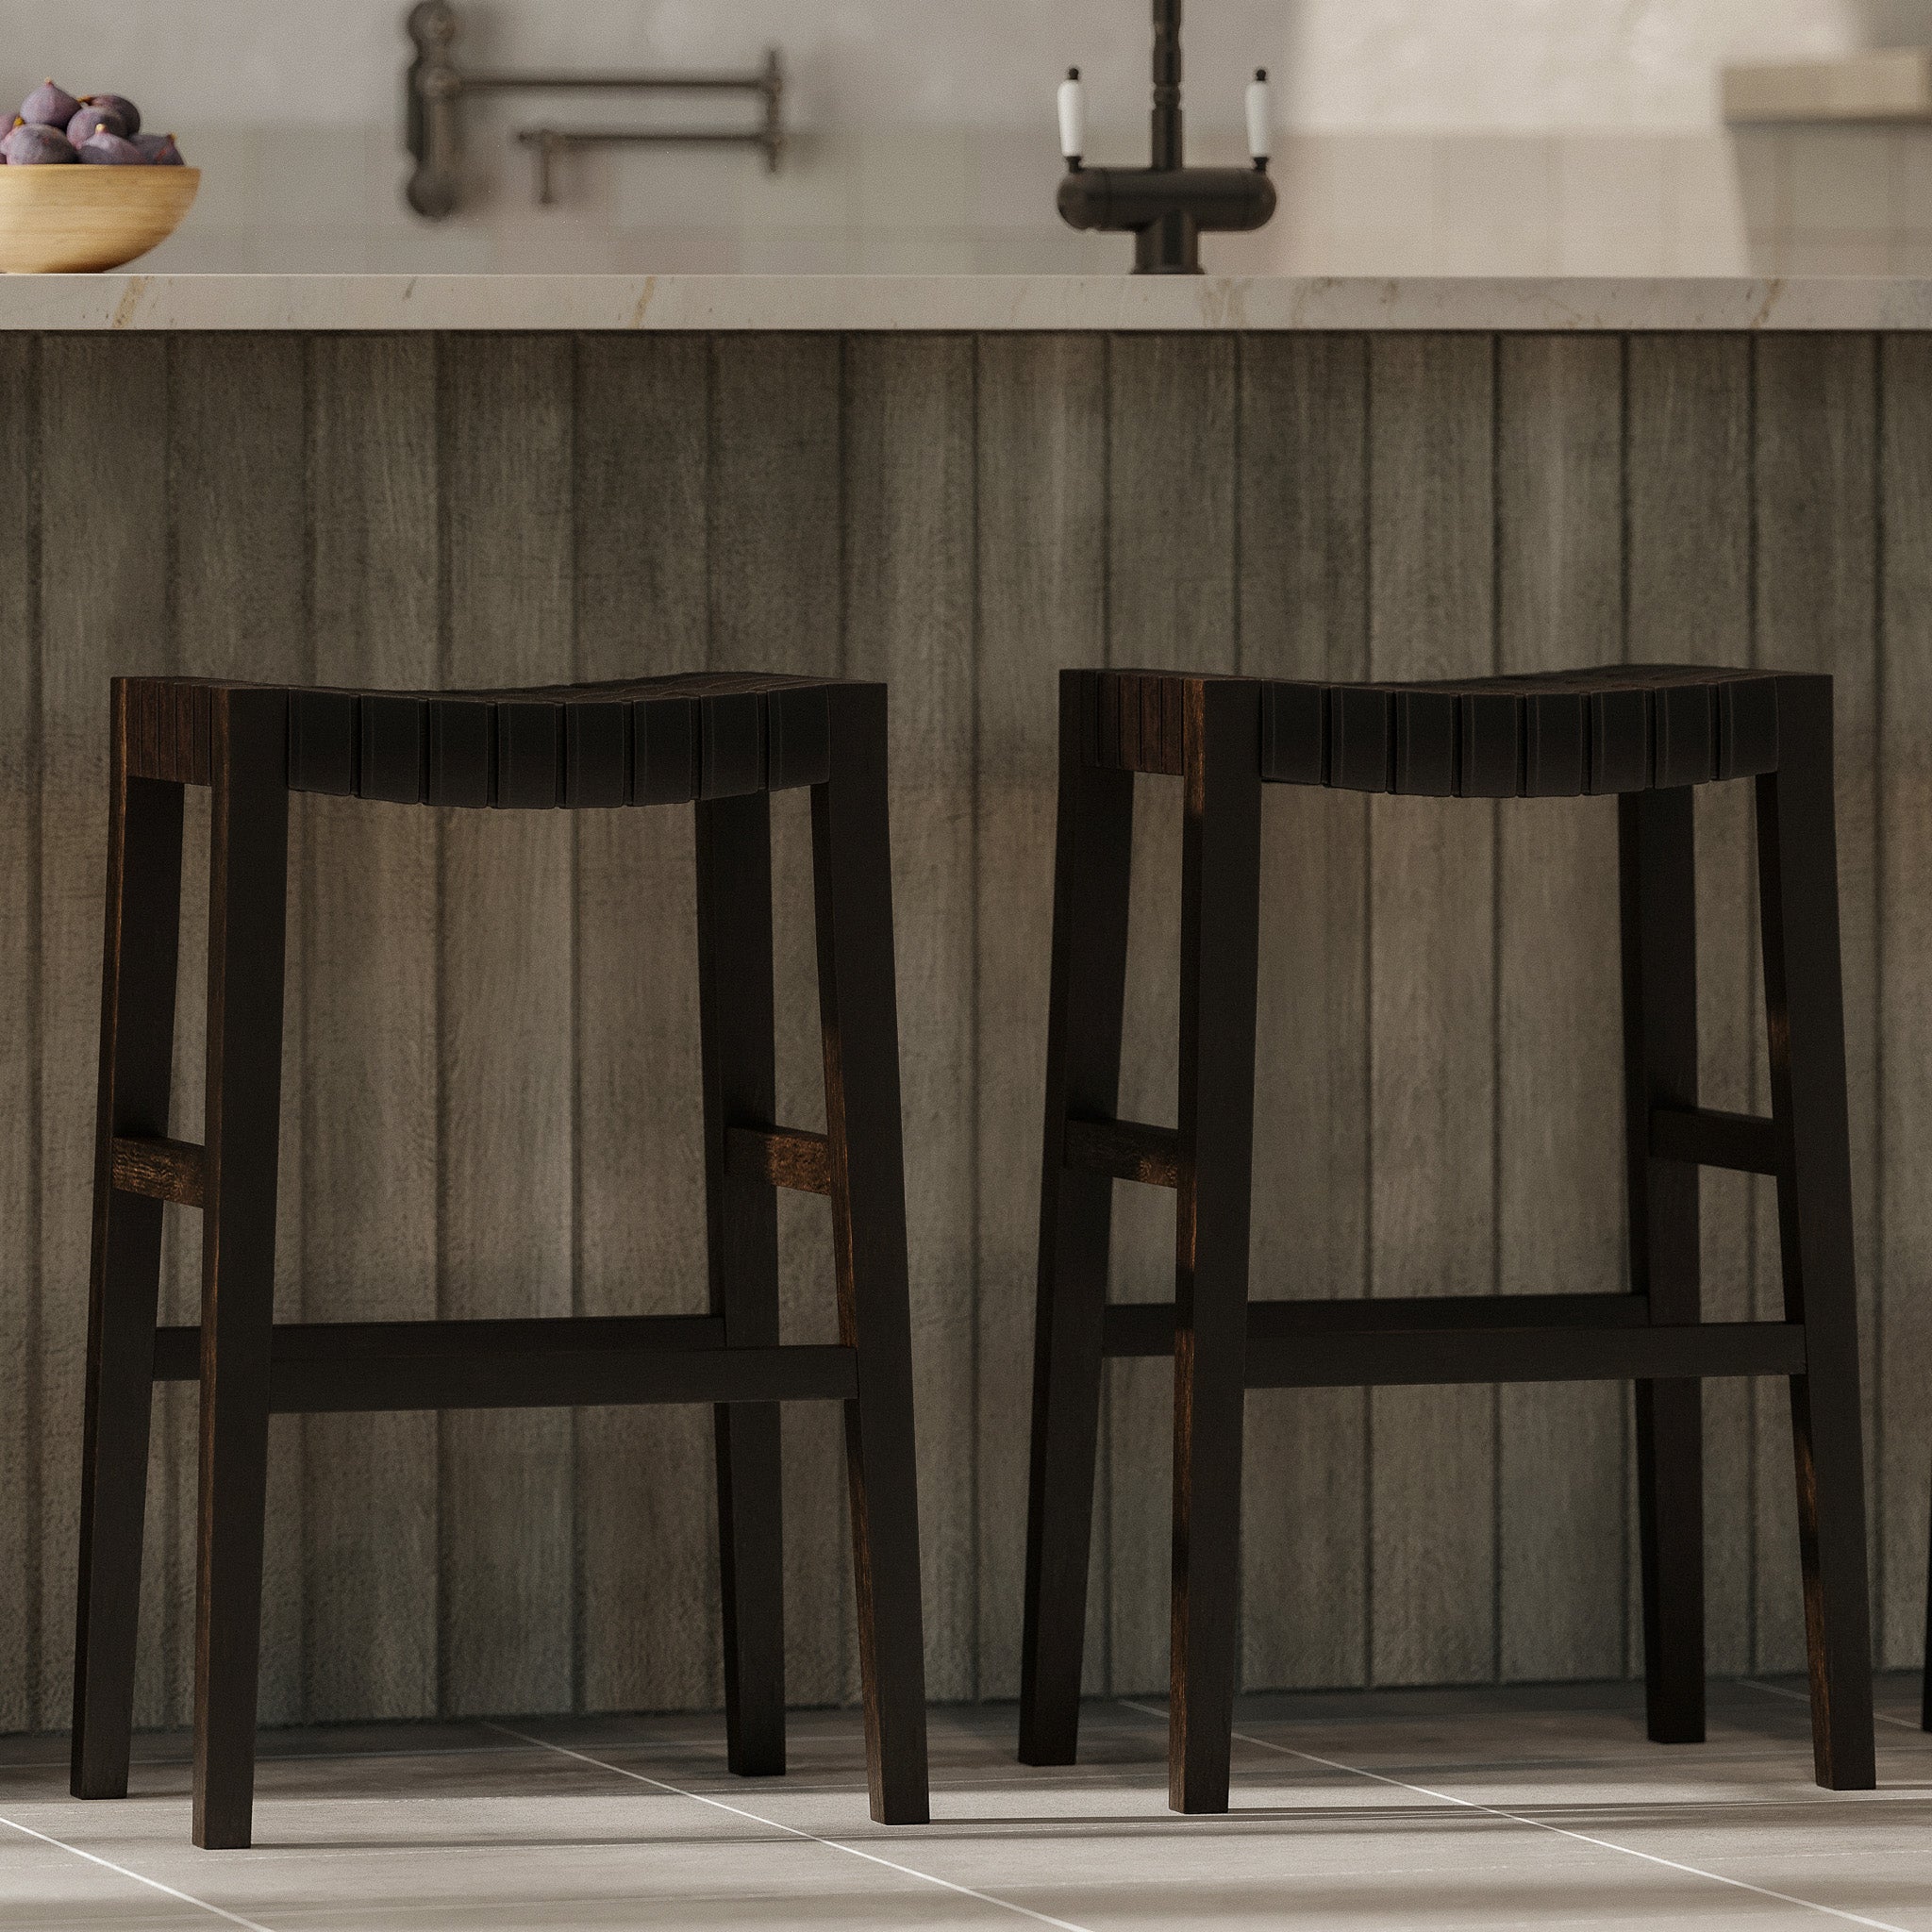 Emerson Bar Stool in Weathered Brown Wood Finish with Marksman Saddle Vegan Leather in Stools by Maven Lane